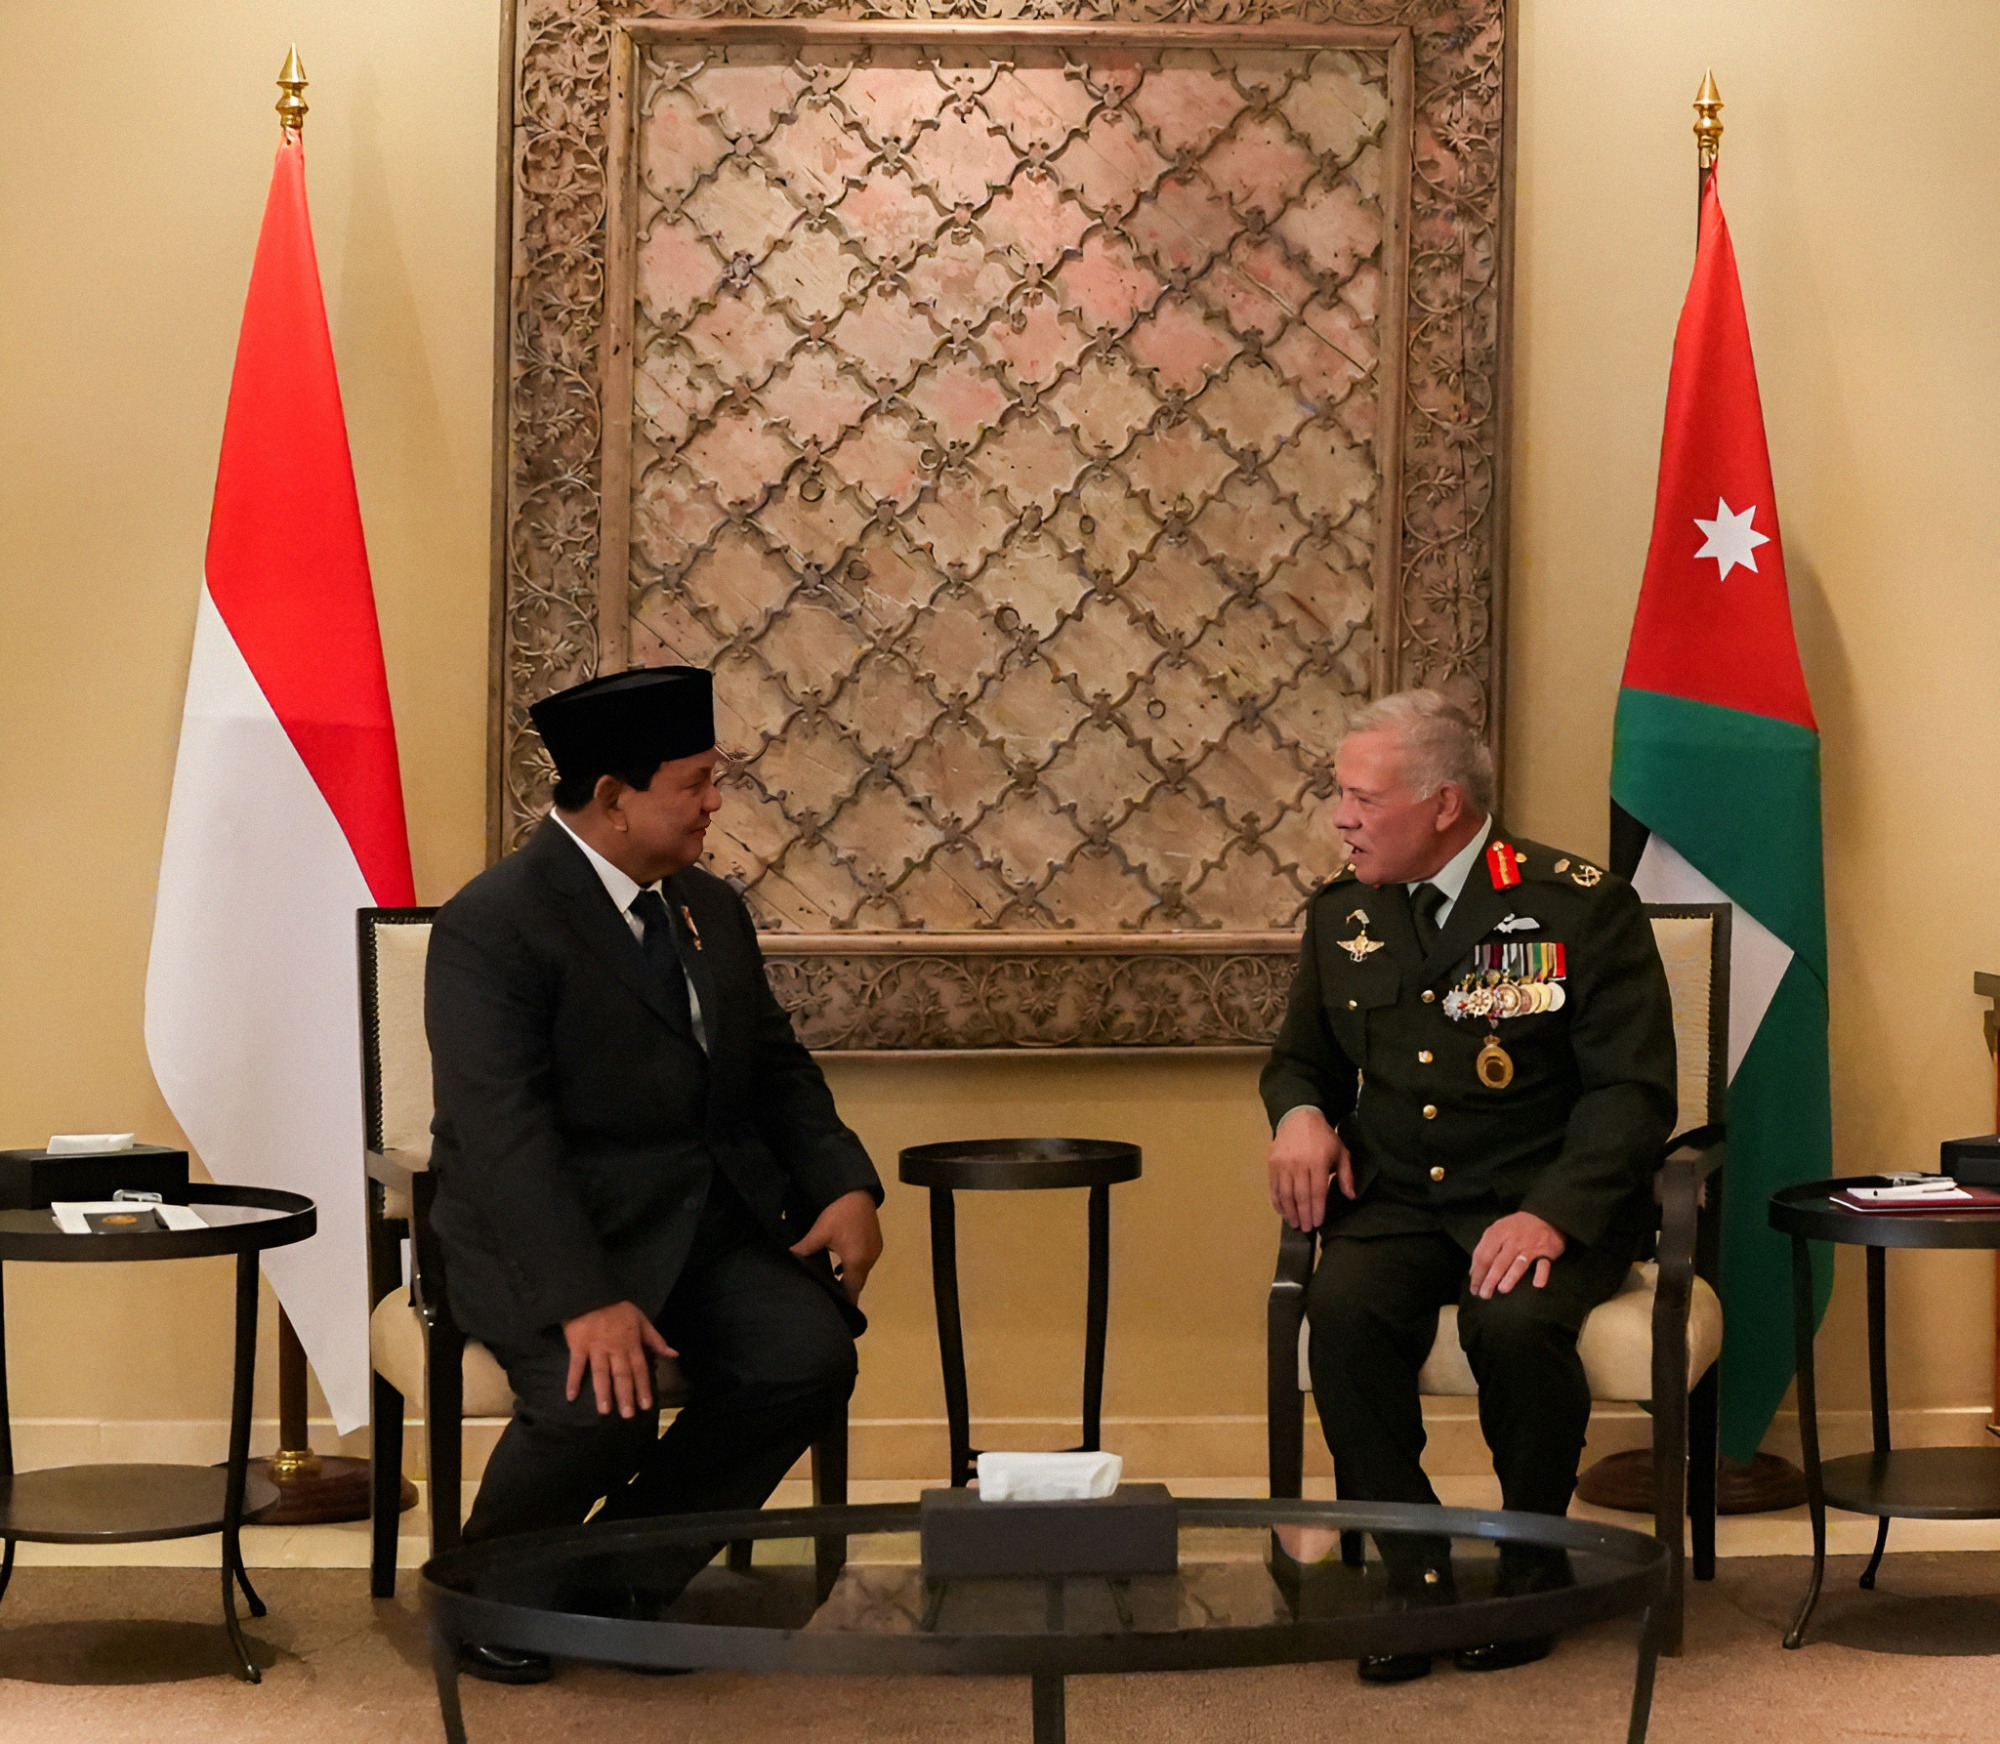 Prabowo Subianto Meets King Abdullah II, Receives Congratulations and Conveys Greetings from Jokowi